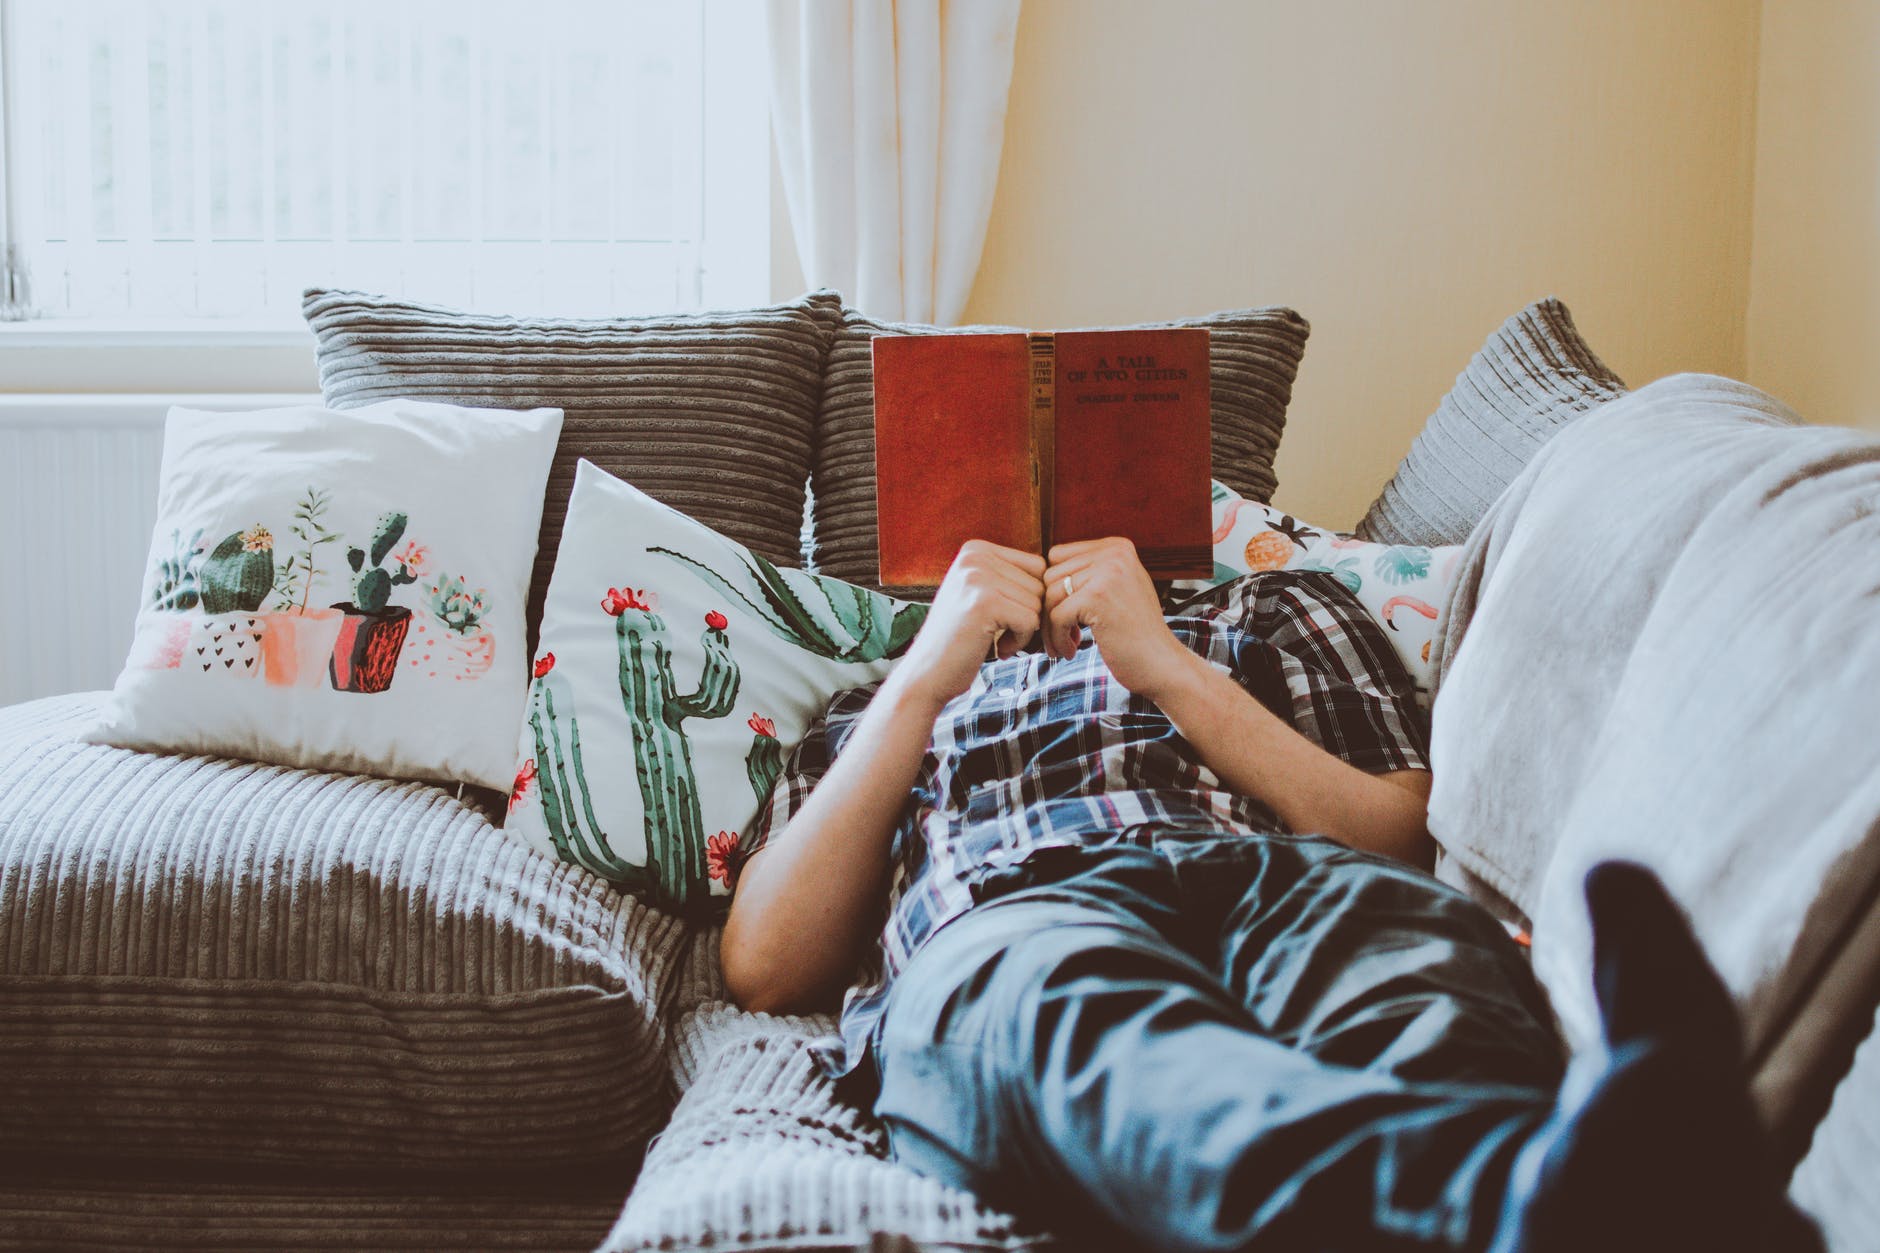 person laying on sofa while reading book